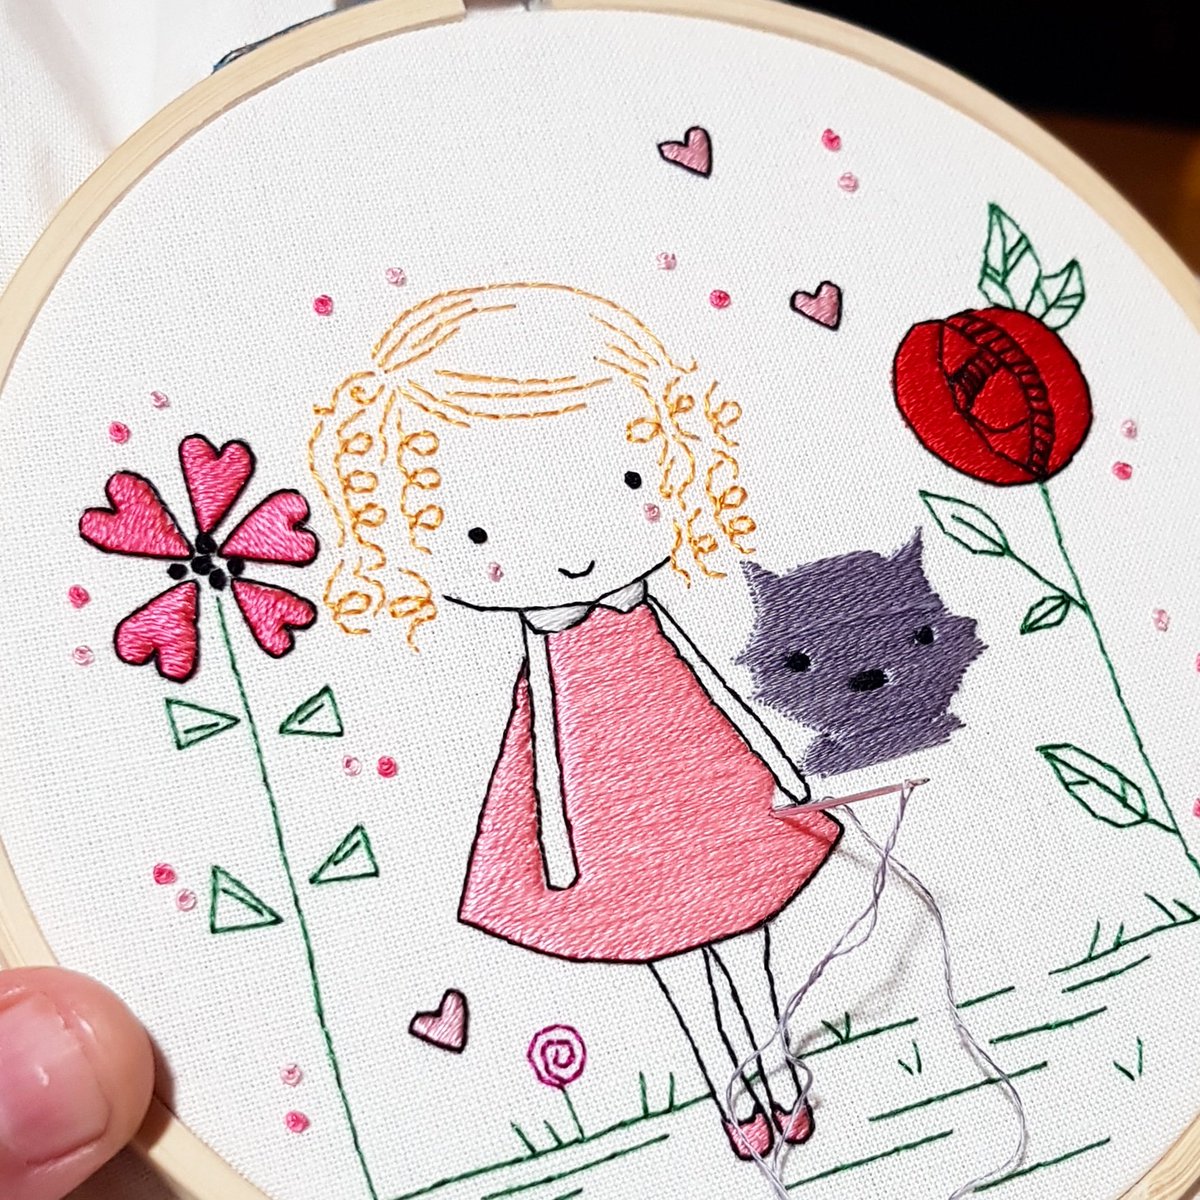 The count down is well and truly on now for me to finish everything 😂 next up we have the adorable @daisyraedesign 😊🐱

#bigpixiecollab #collaboration #handmadehour #crafthour #womaninbiz